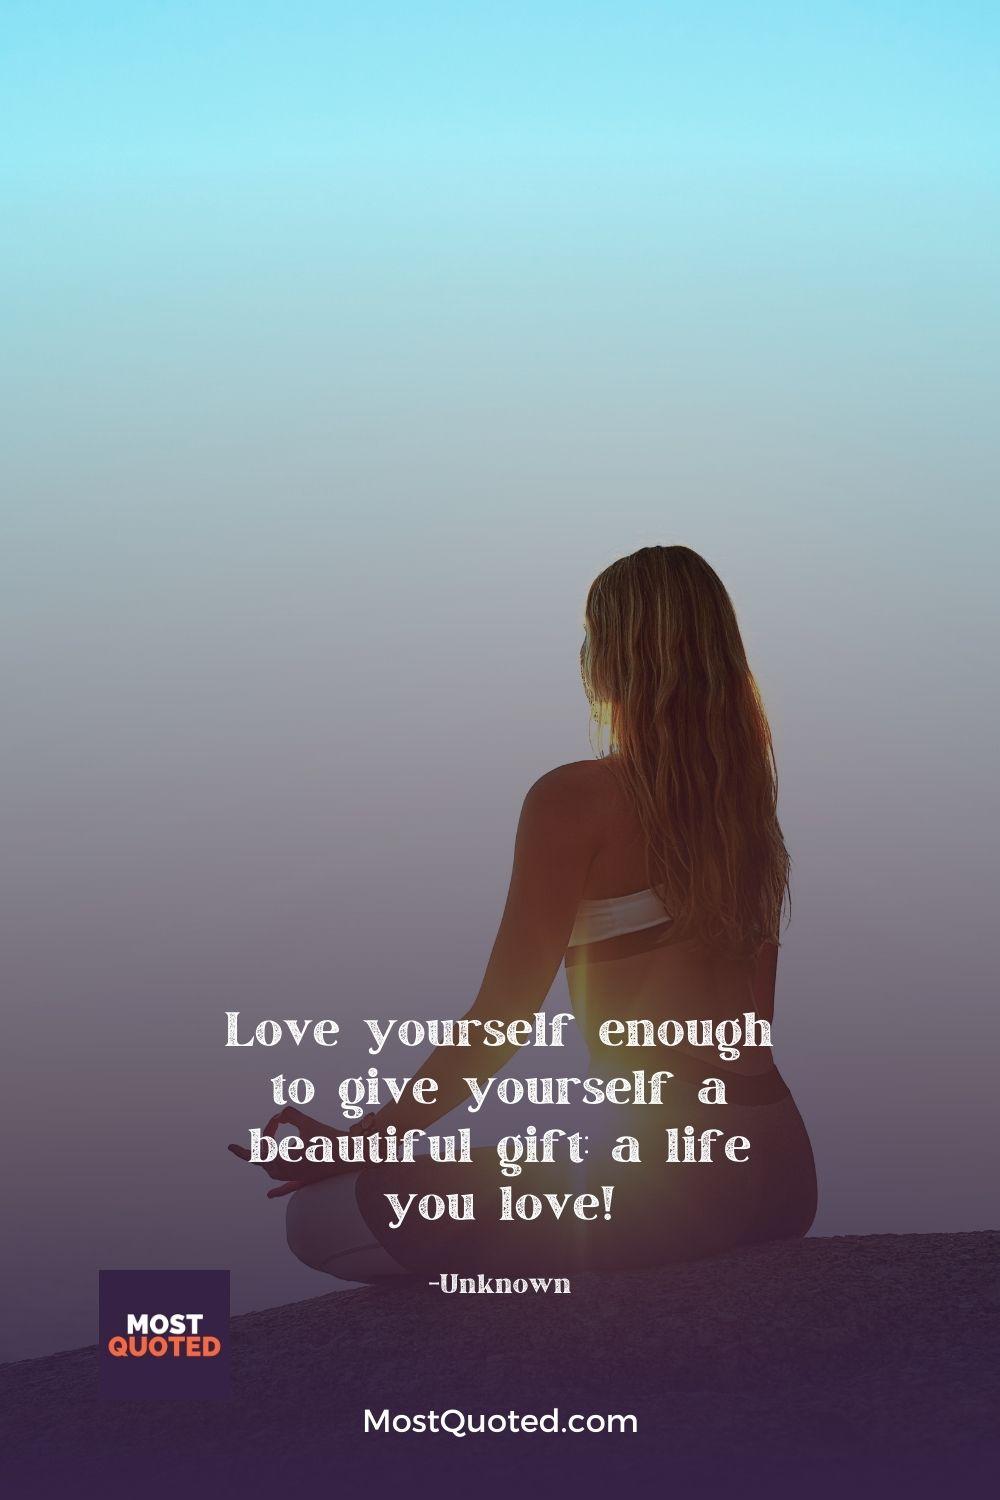 Love yourself enough to give yourself a beautiful gift: a life you love!